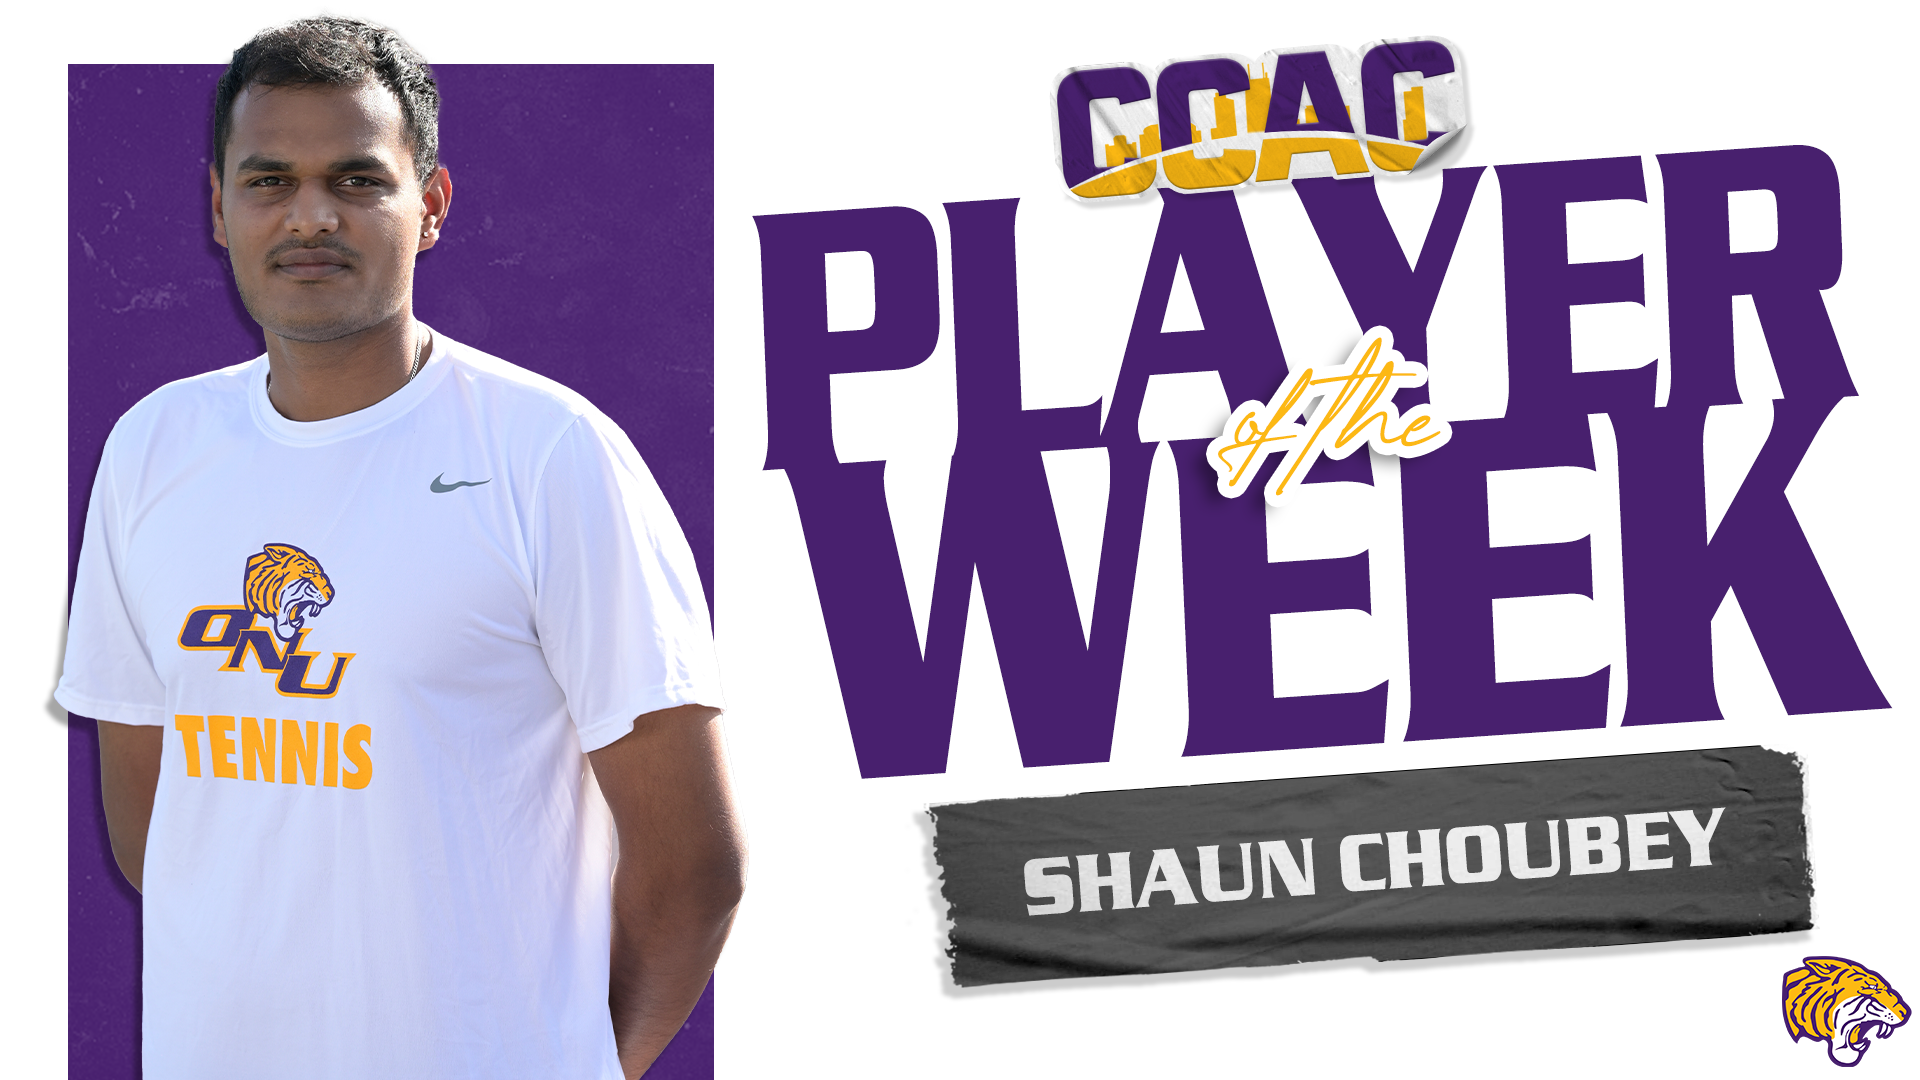 CHOUBEY SECURES CCAC MEN’S TENNIS WEEKLY ACCORD